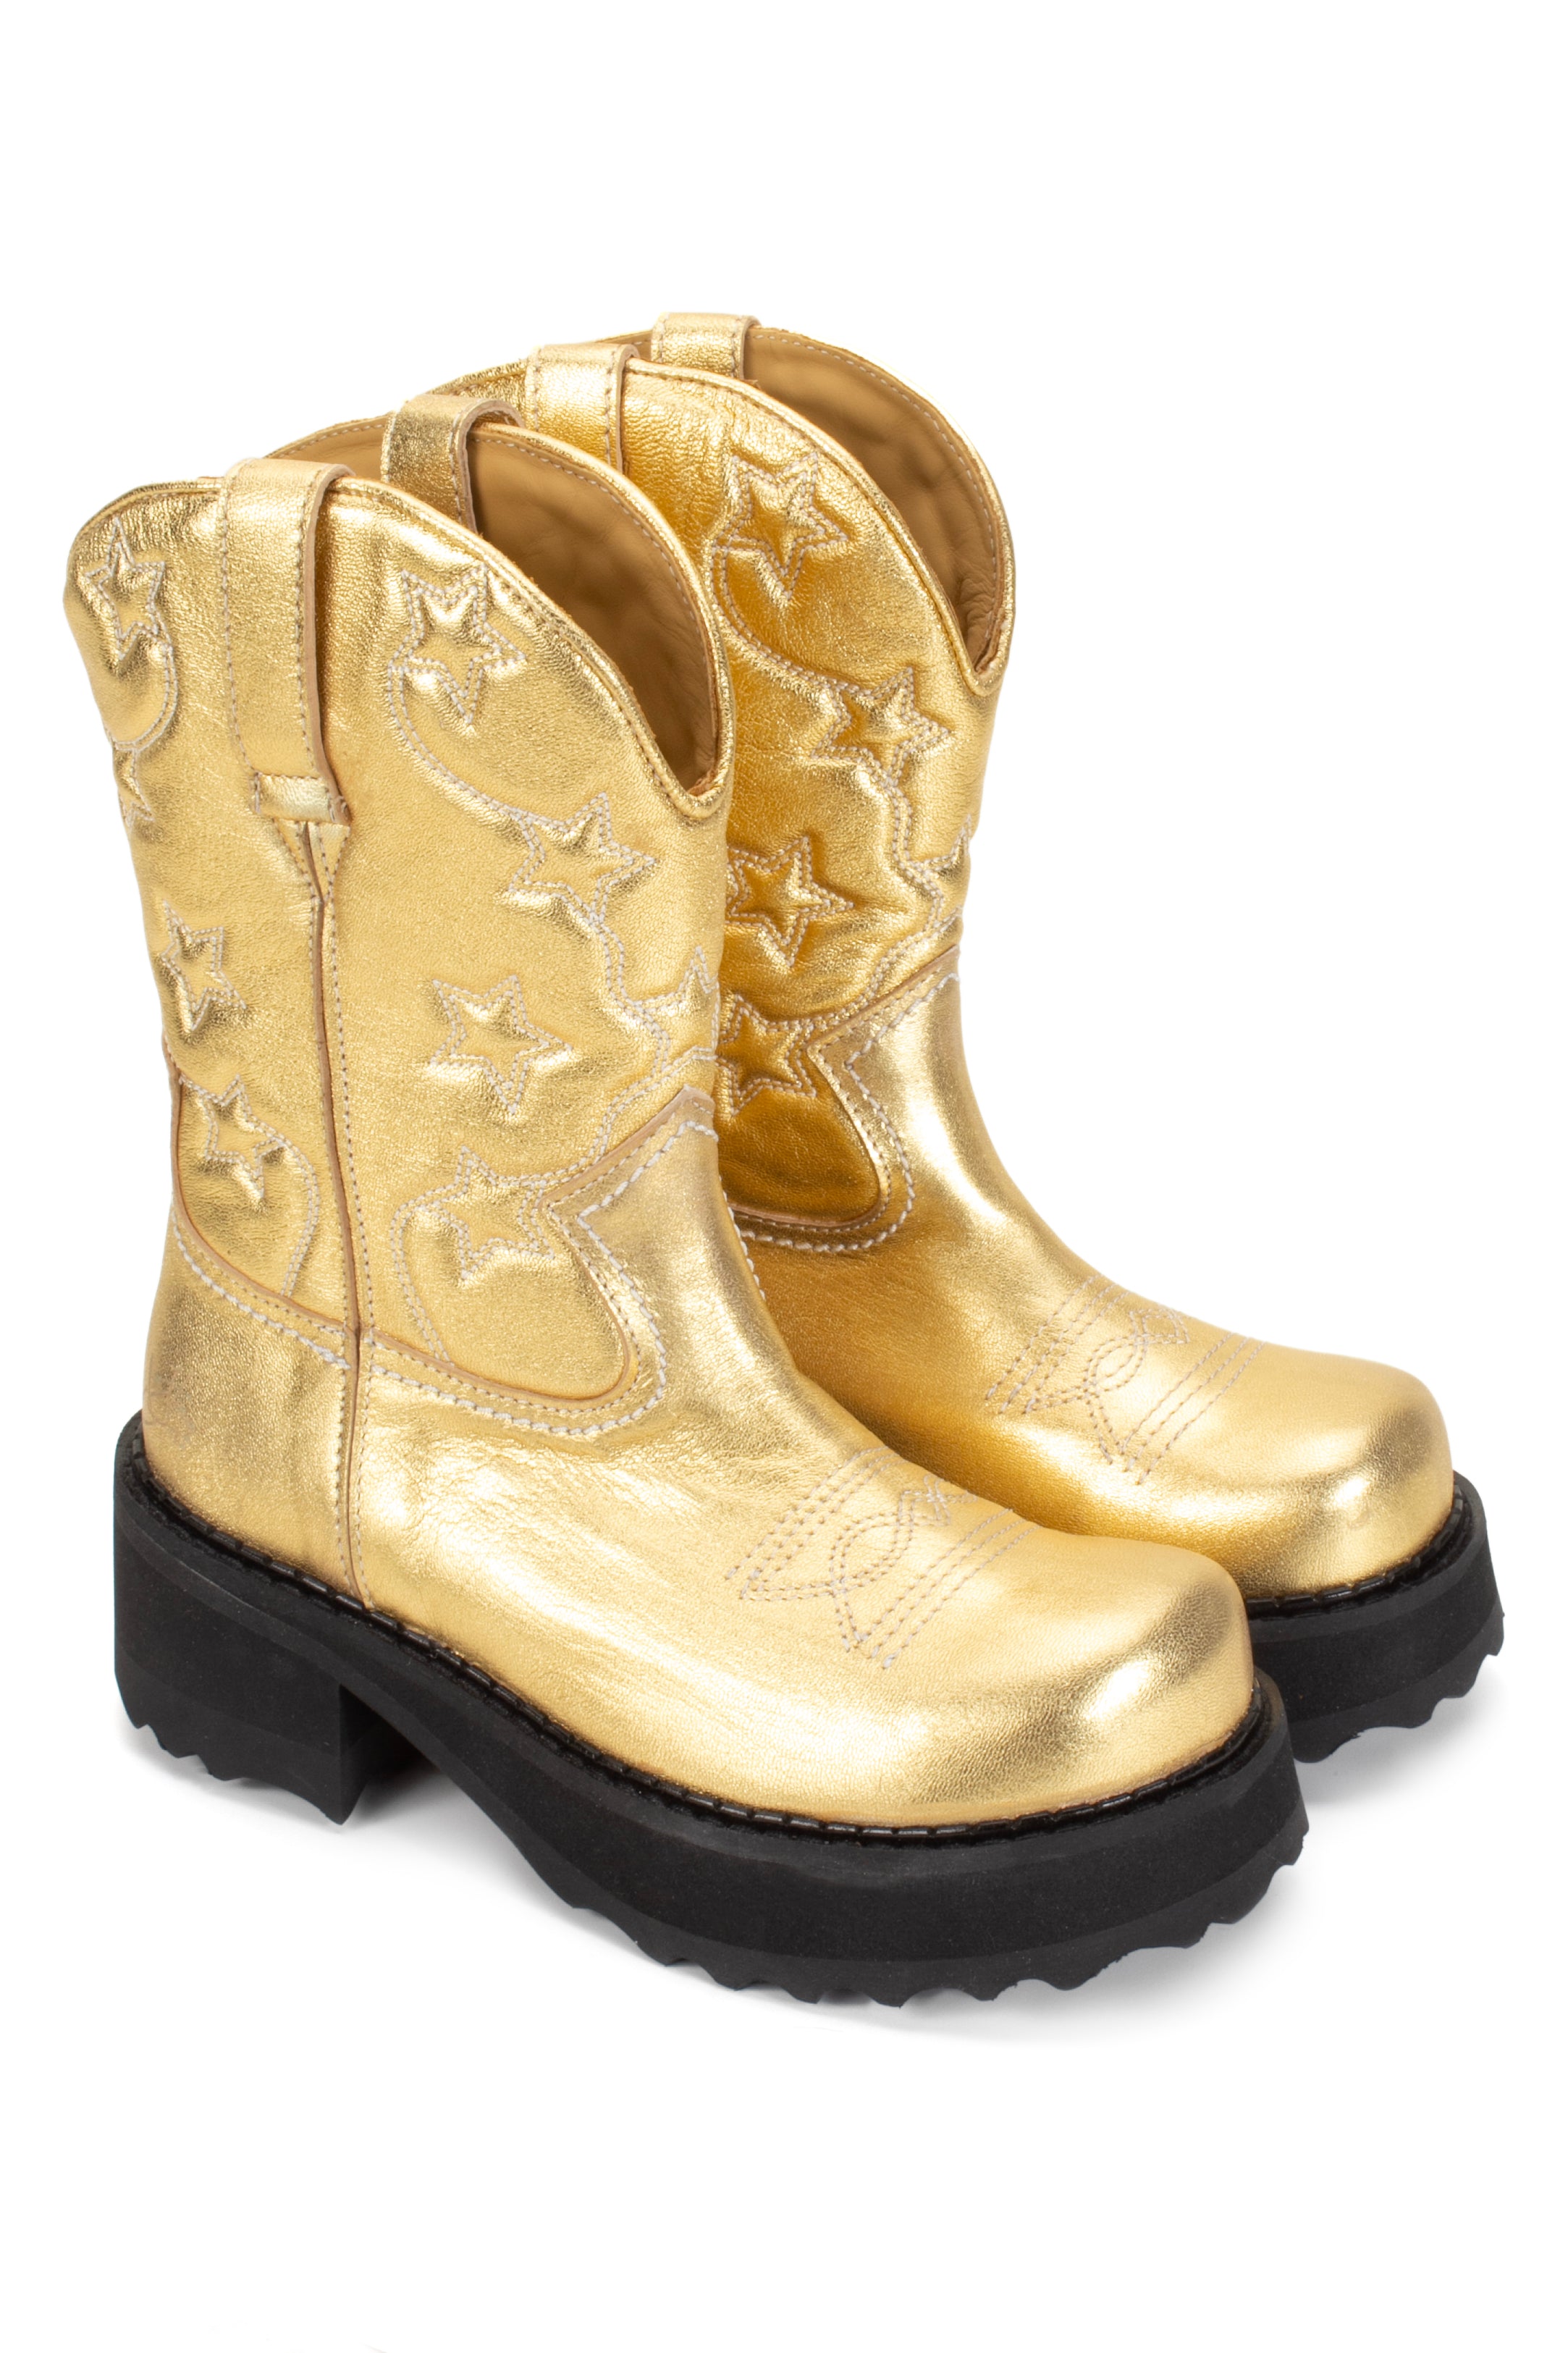 The Anna Sui x John Fluevog Ankle Cowboy Boot, are a pair of gold cowboy-style boots with a high black sole